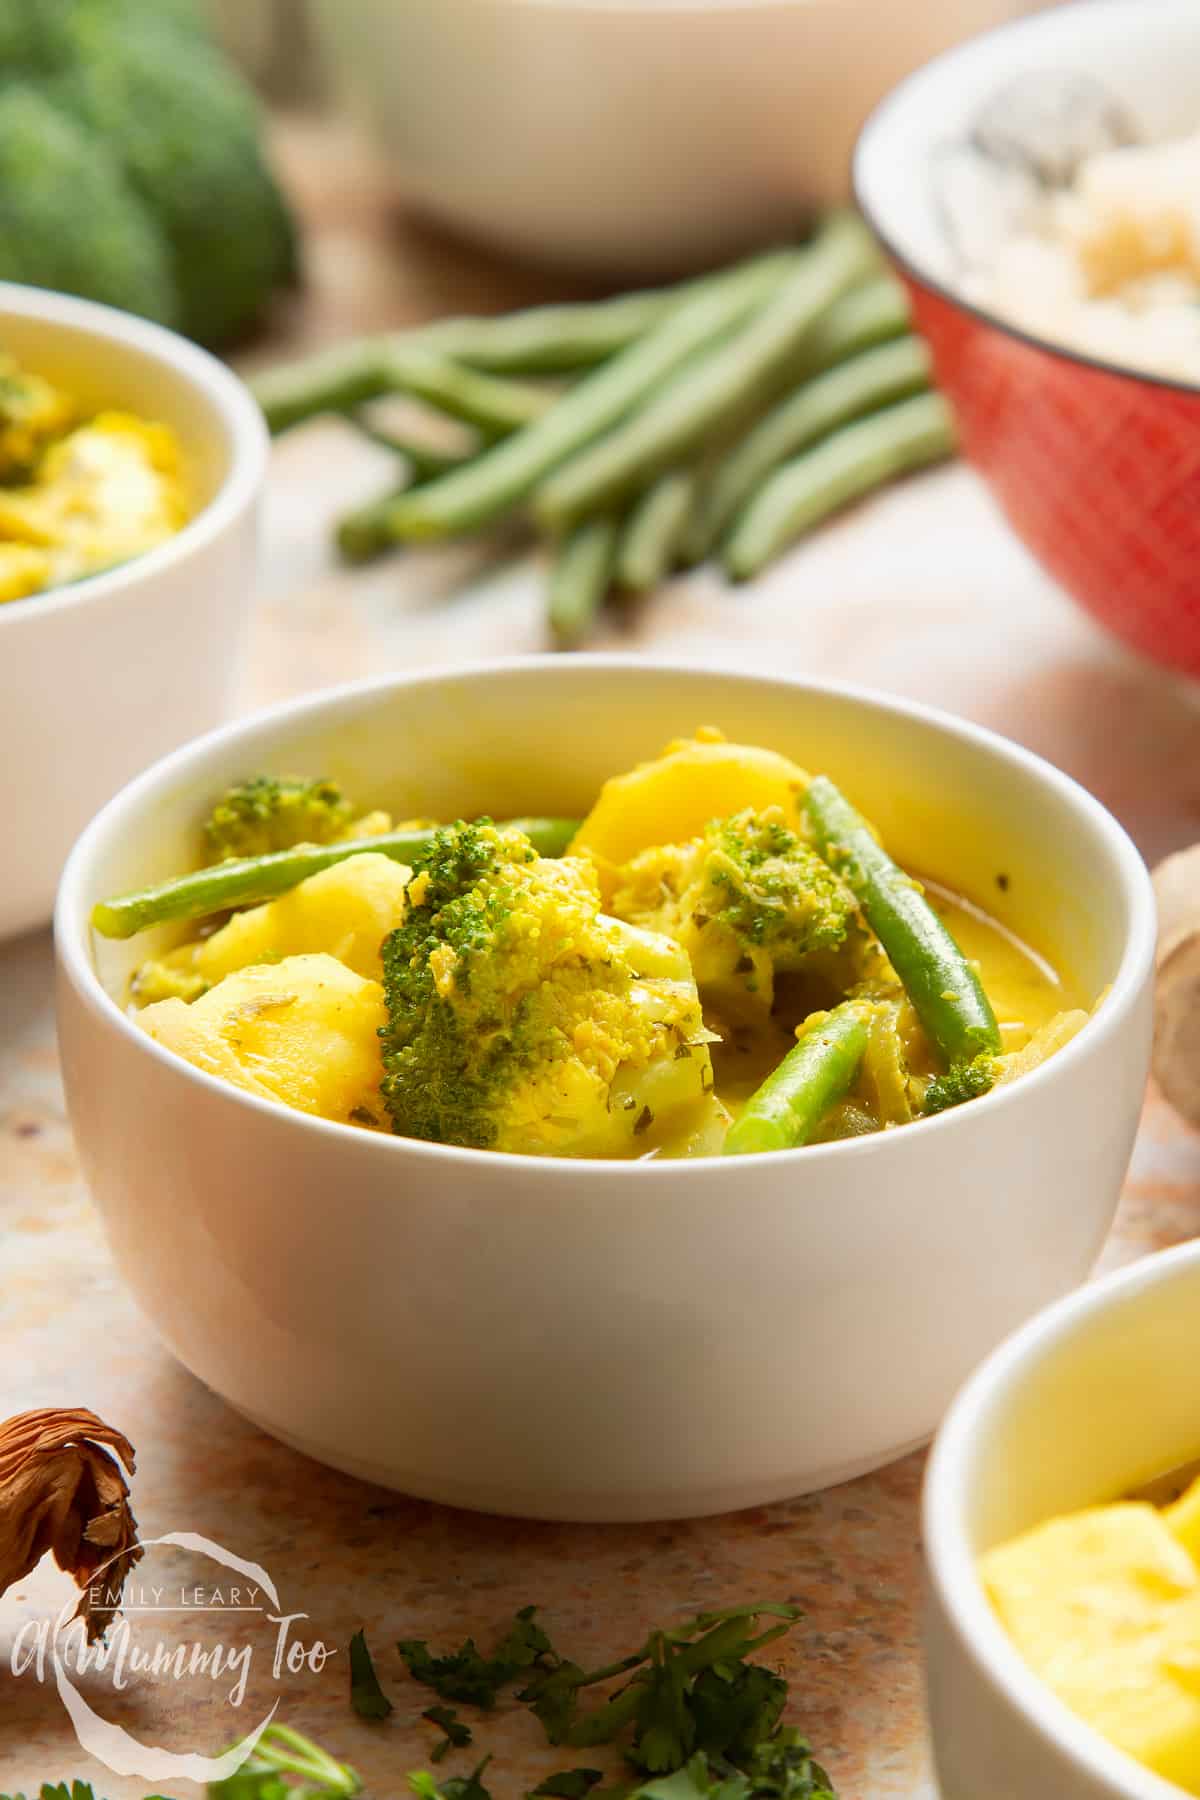 Vegetarian yellow curry with broccoli, potato and green beans, served to small white bowls. A bowl of rice is shown in the background.